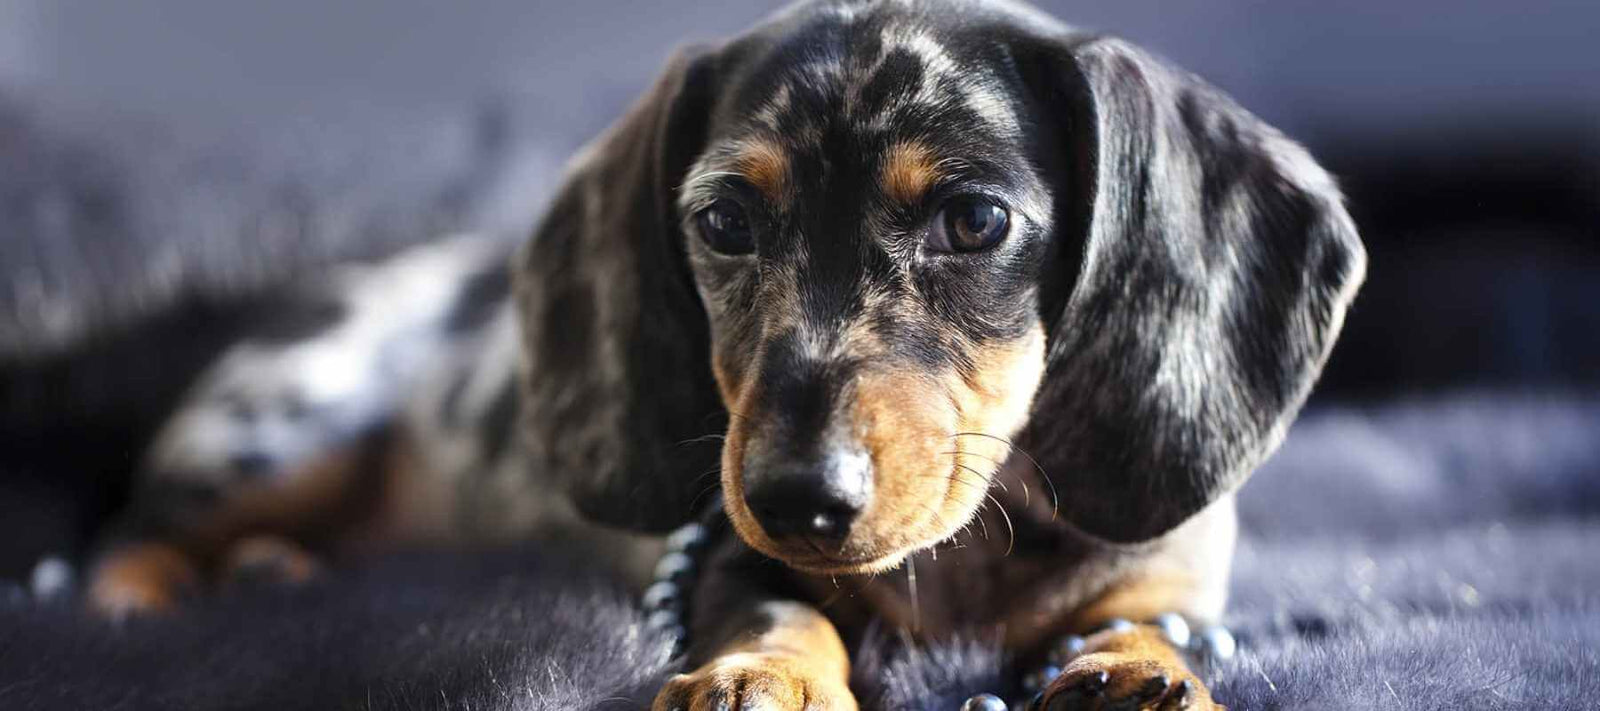 25 Most Popular Small Breed Dogs in America: 2021.